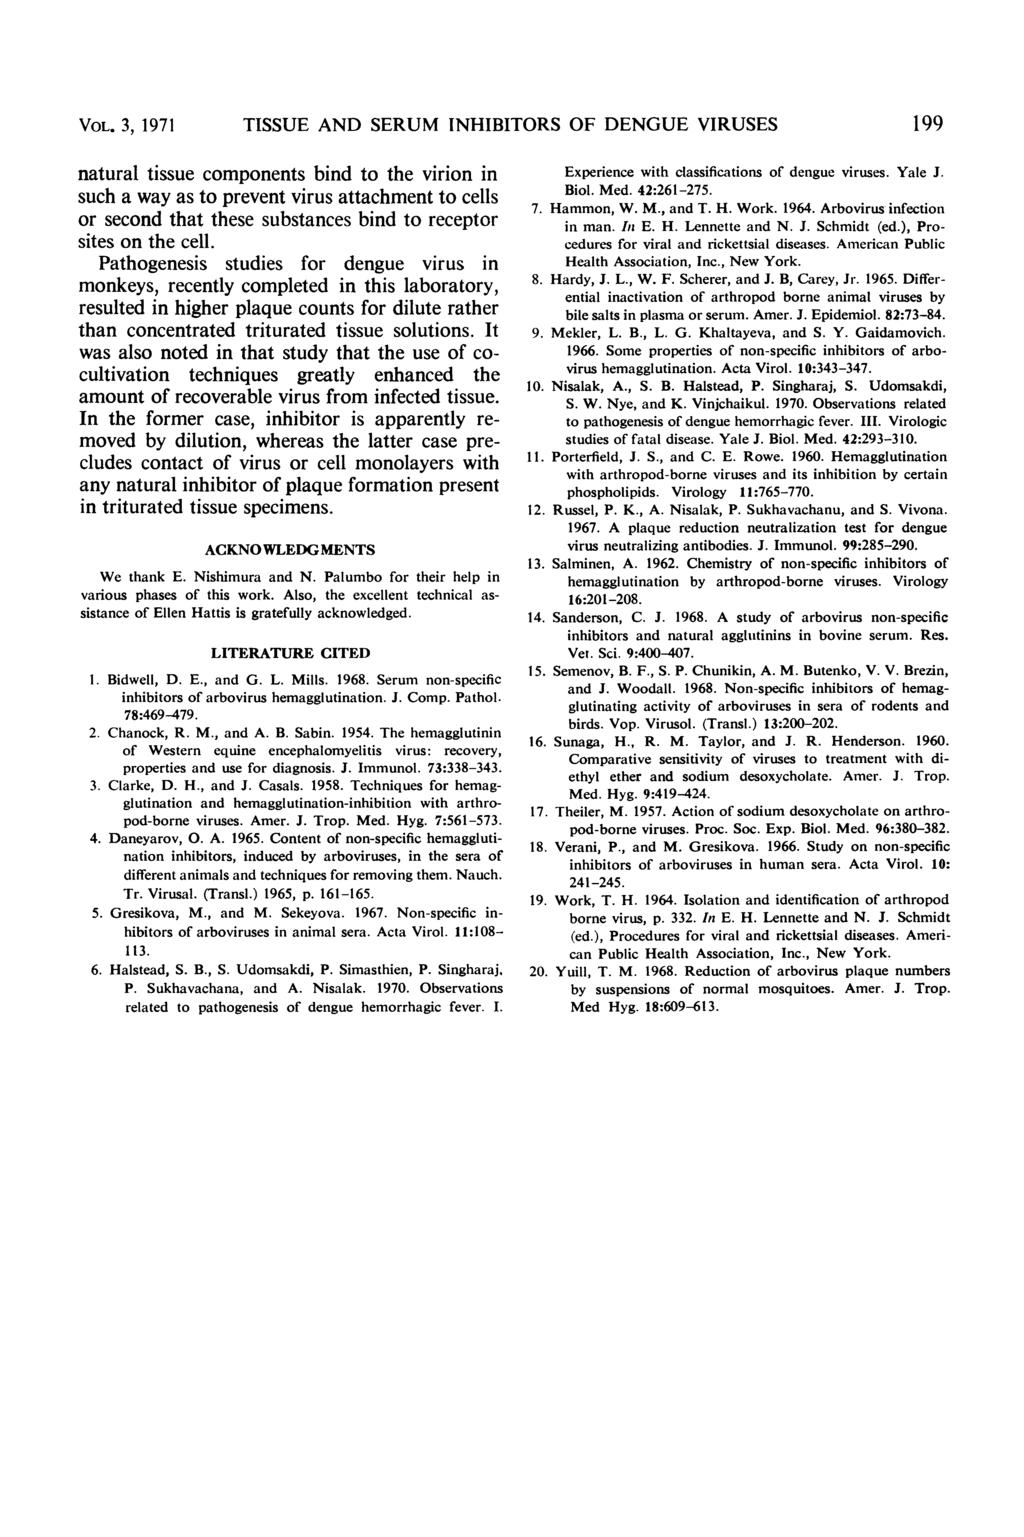 VOL. 3, 1971 TSSUE AND SERUM NHBTORS OF DENGUE VRUSES 199 natural tissue components bind to the virion in such a way as to prevent virus attachment to cells or second that these substances bind to